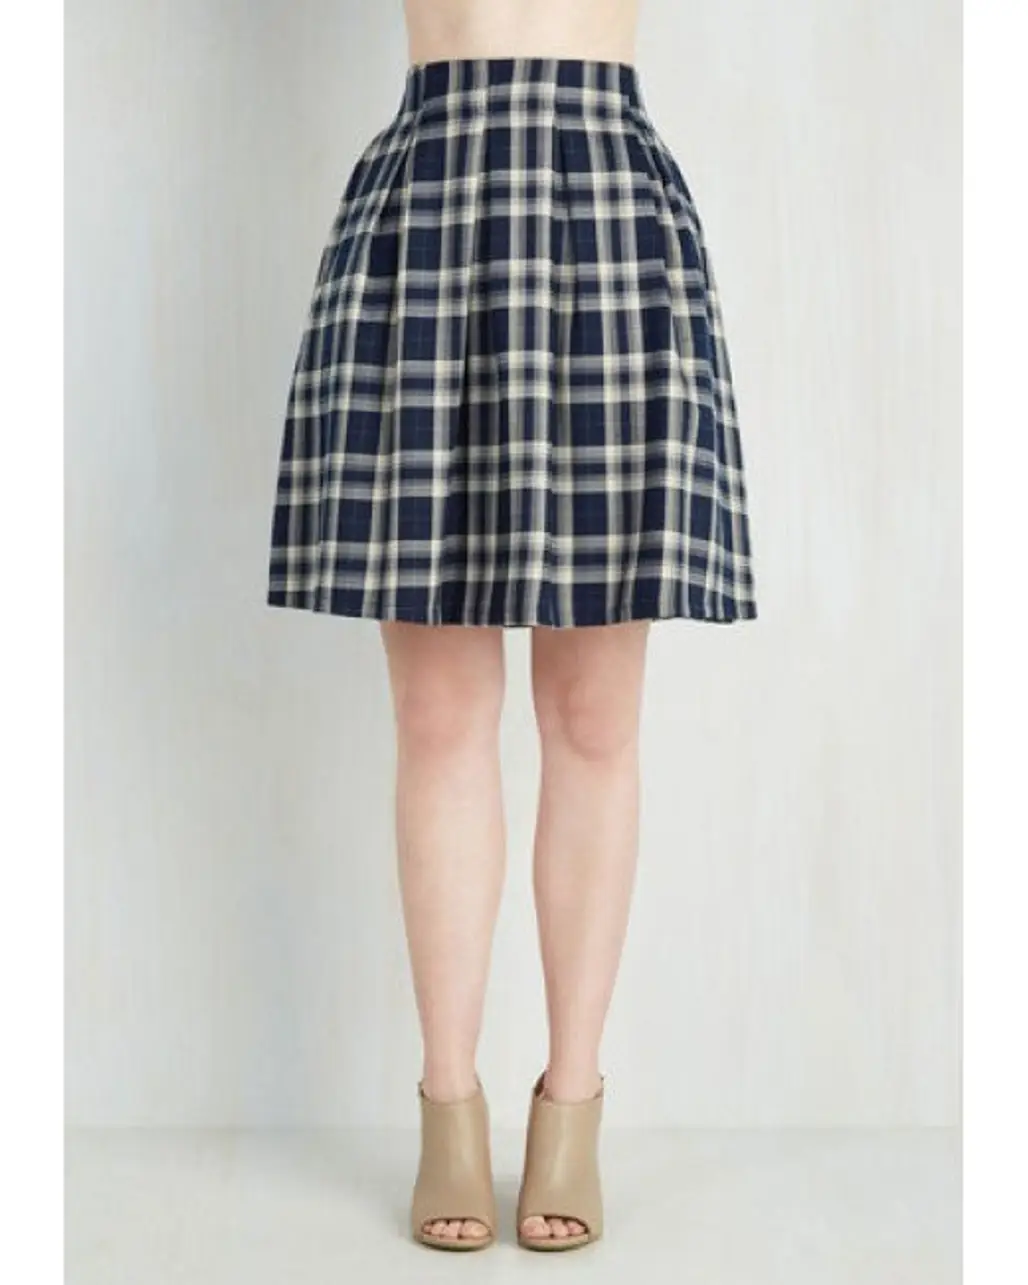 Sweet and Tartan Skirt in Ivory